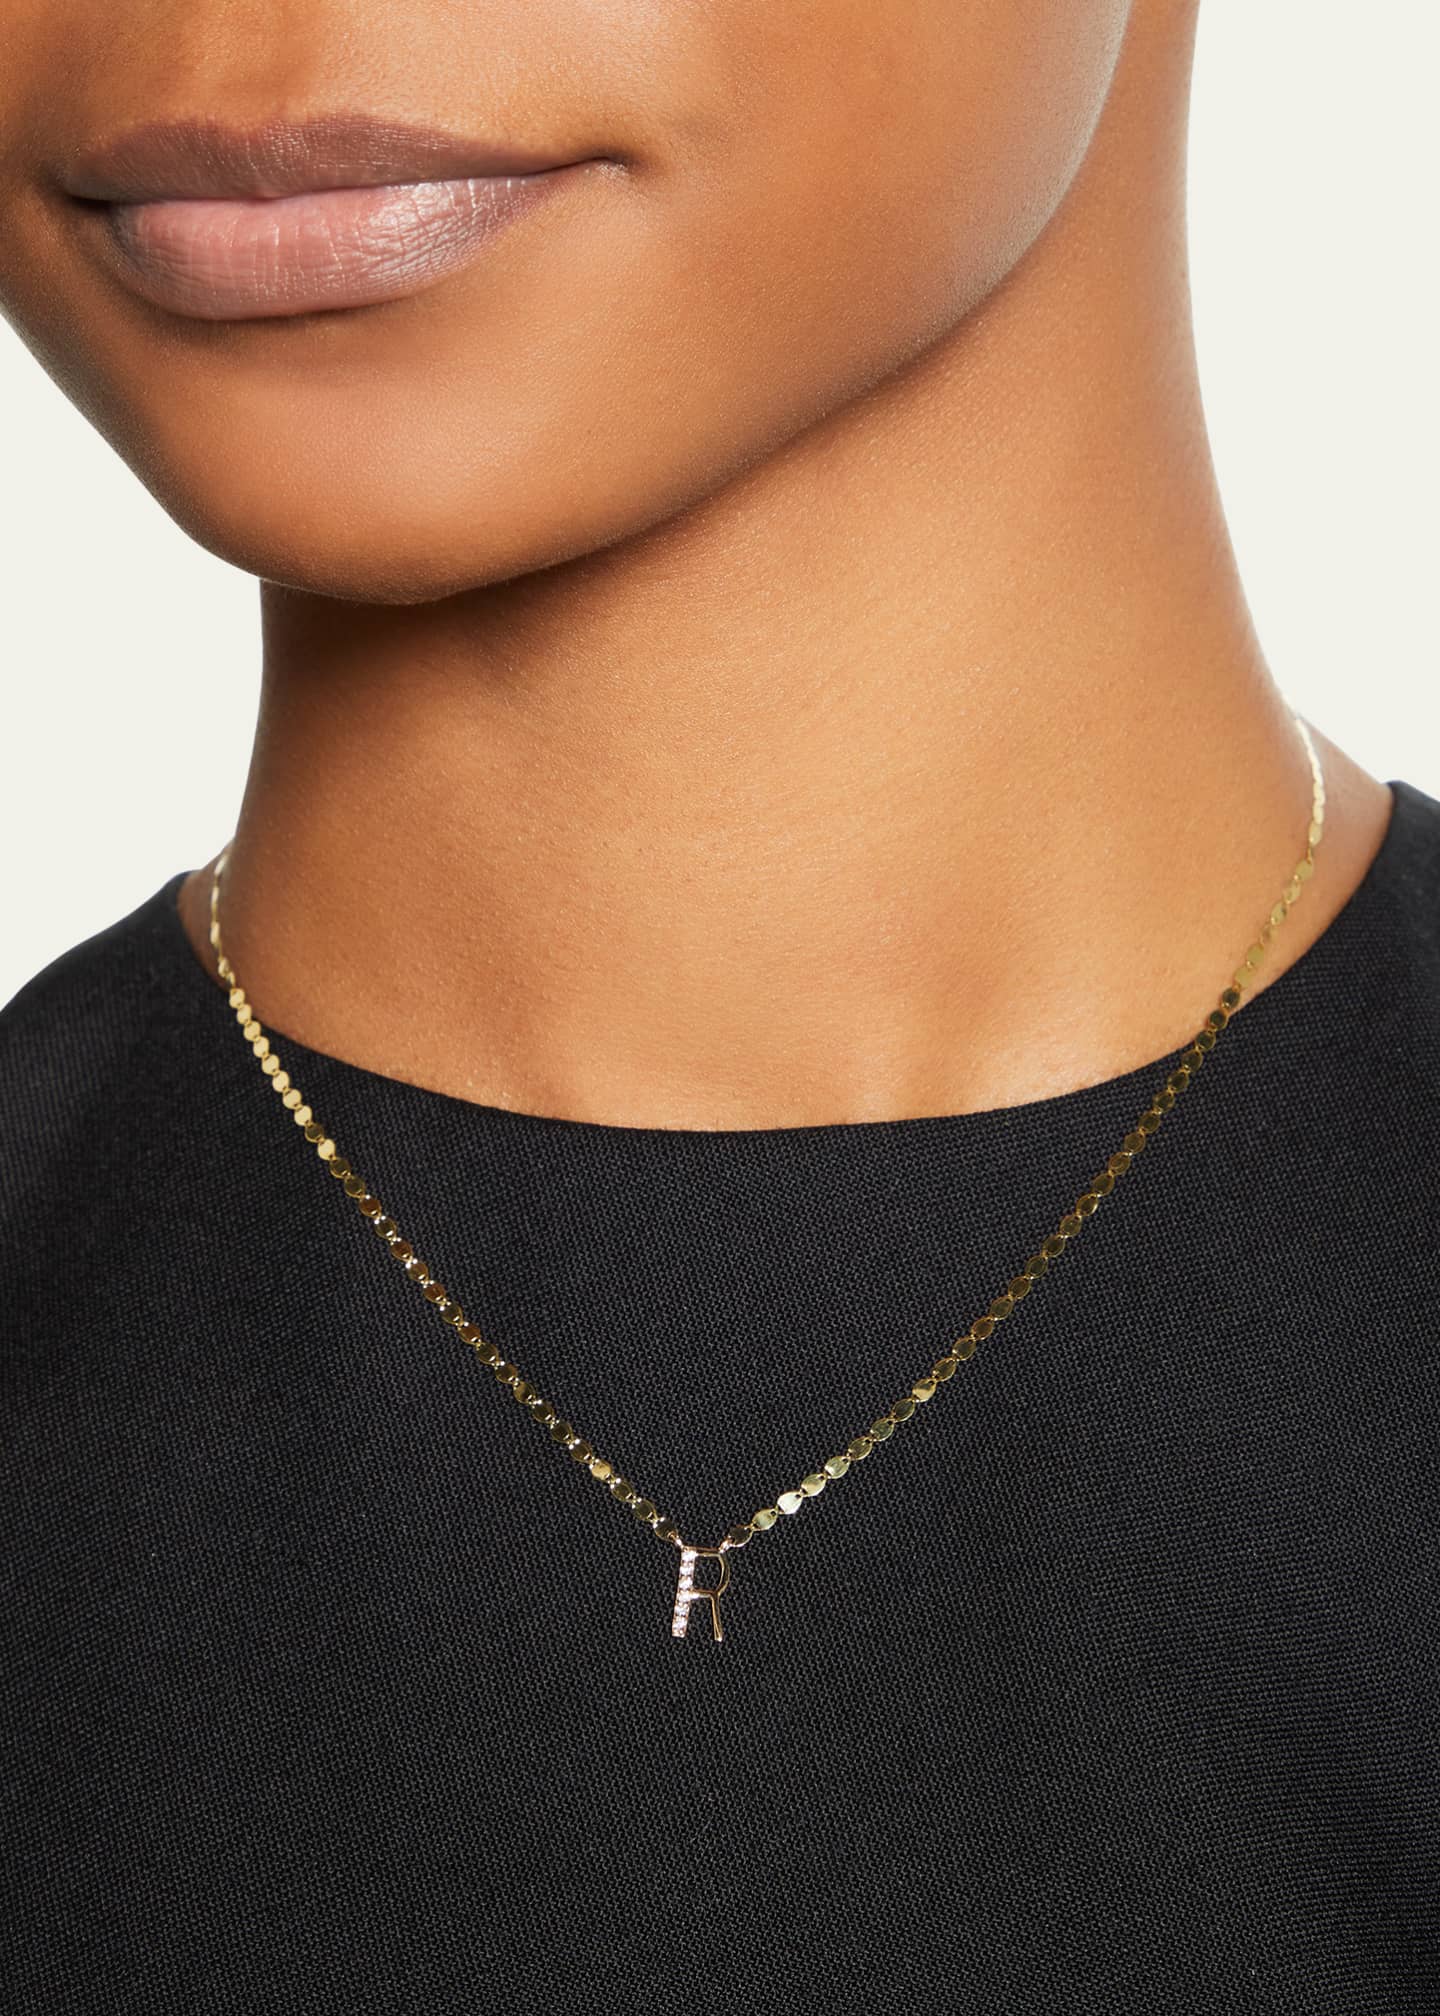 Lana Get Personal Initial Pendant Necklace with Diamonds